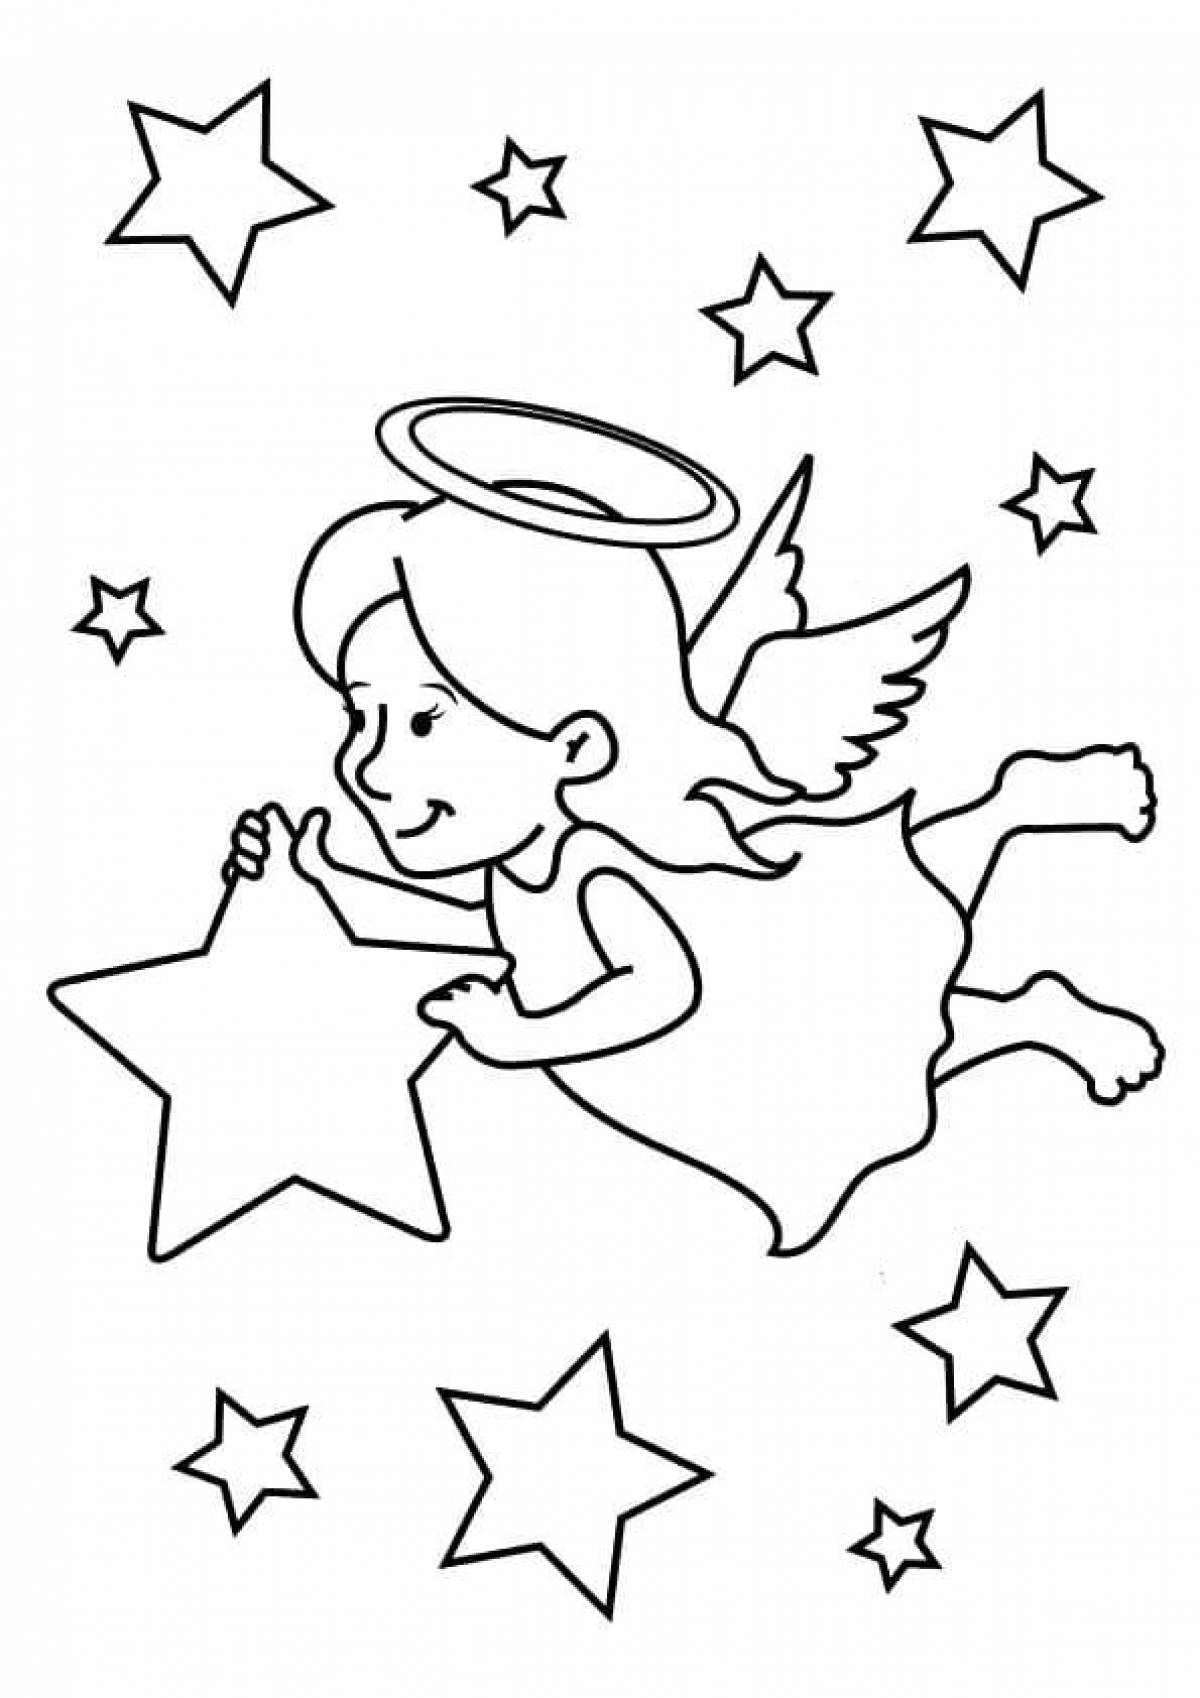 Glowing christmas angel coloring page